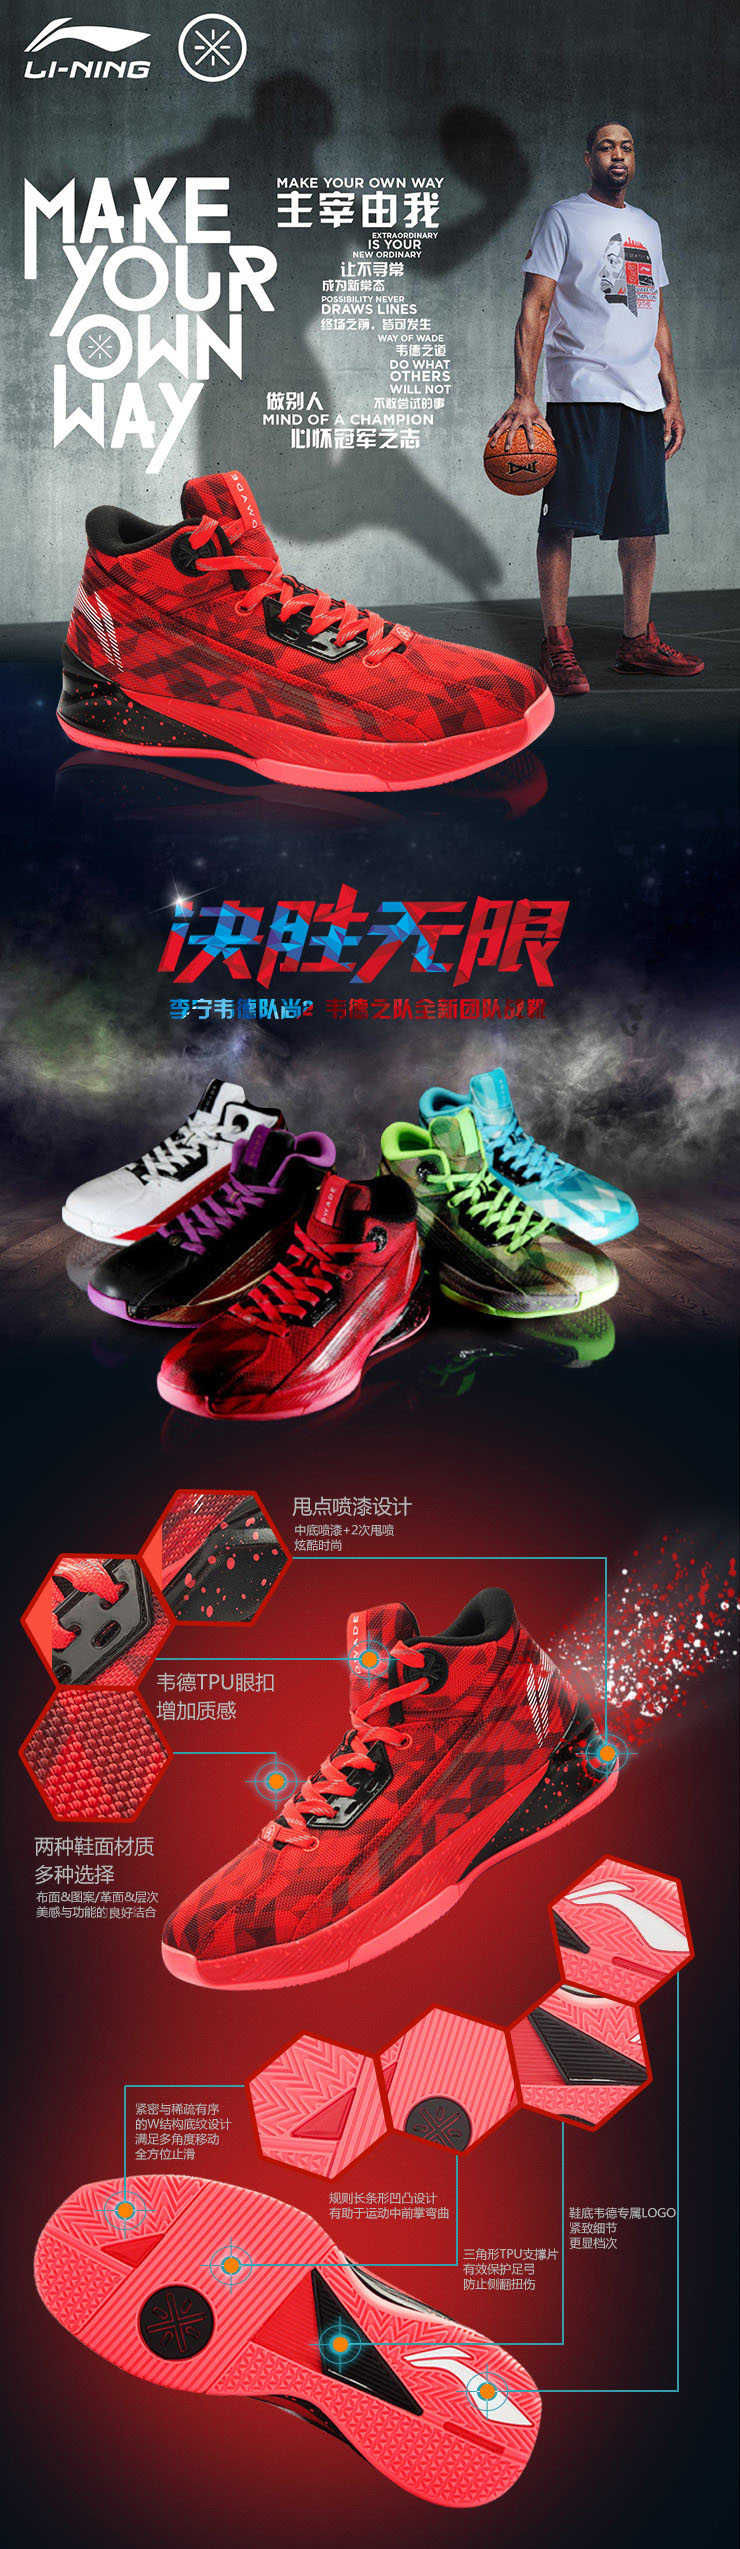 Li-Ning Wade All In Team 2 - Tomato Red/Black Basketball Shoes